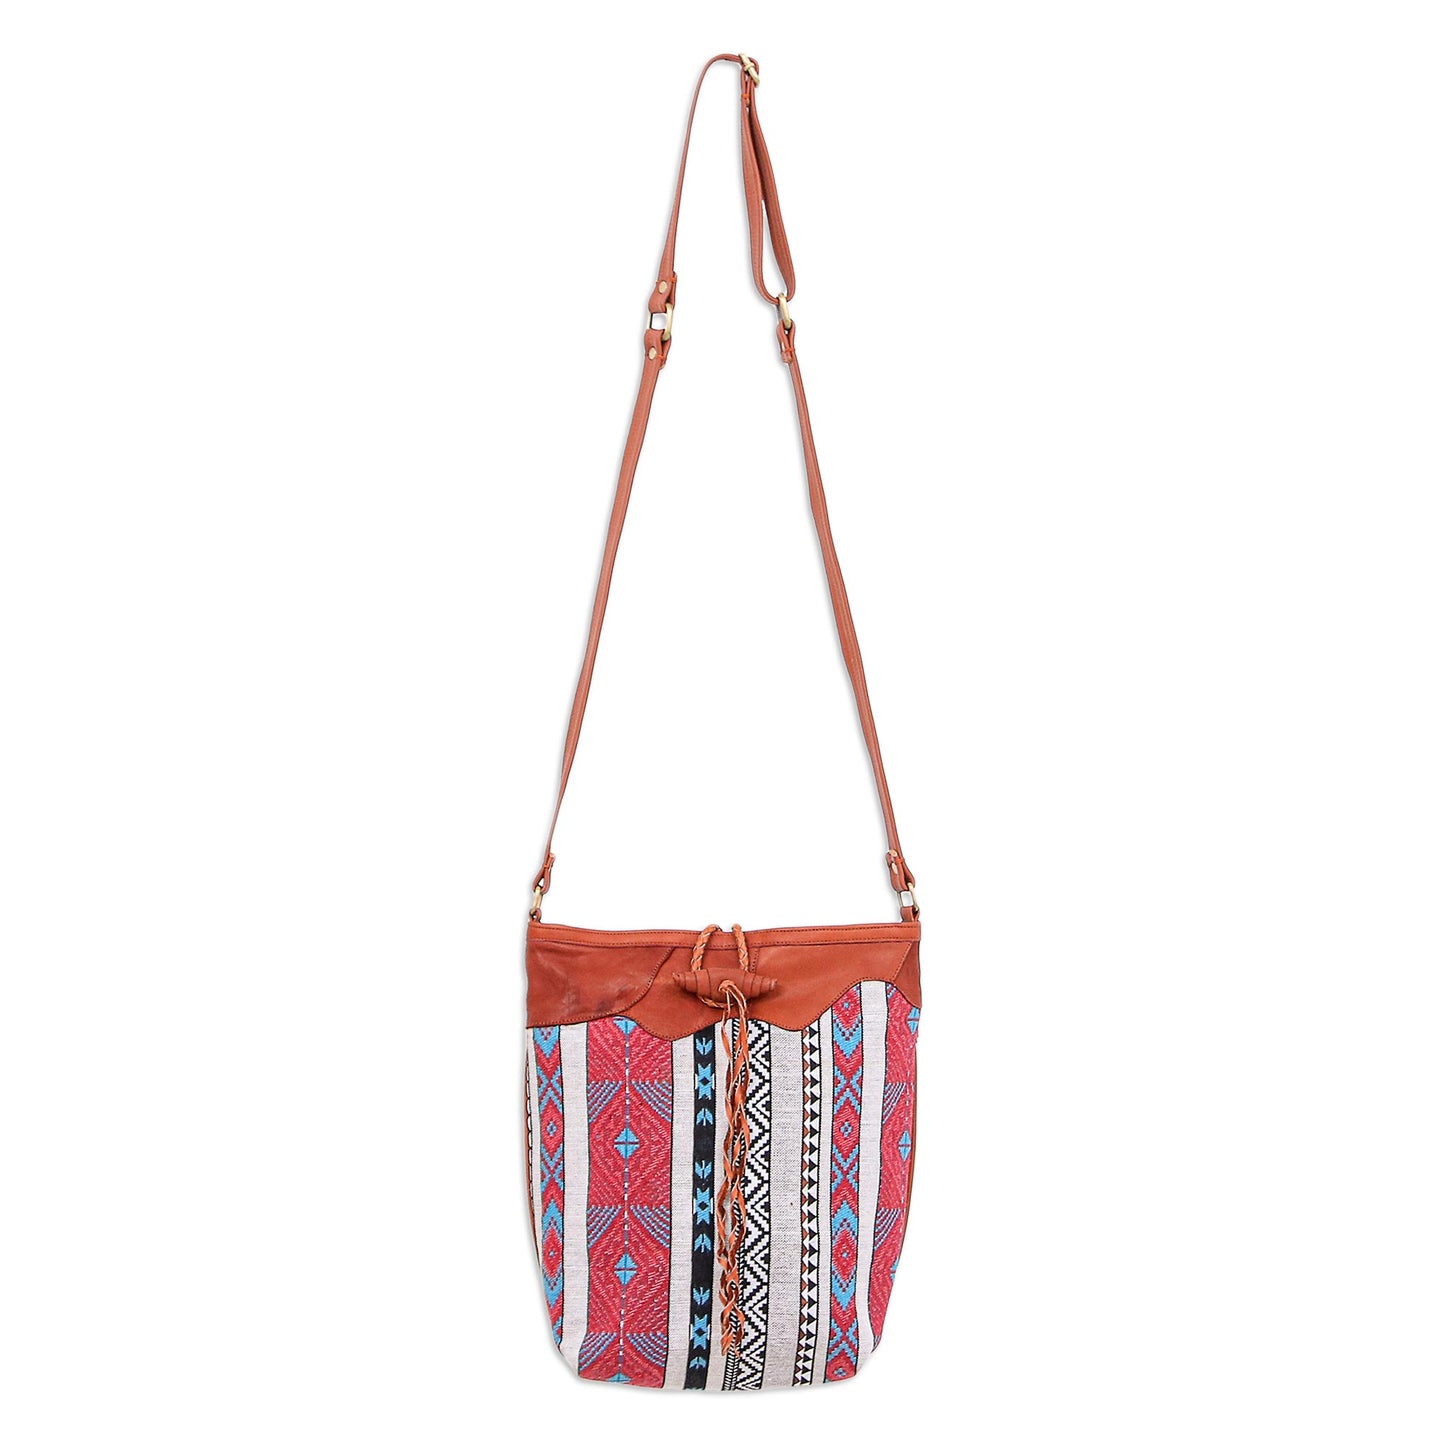 Joyful Journey in Red Patchwork Cotton Blend Sling Bag from Thailand